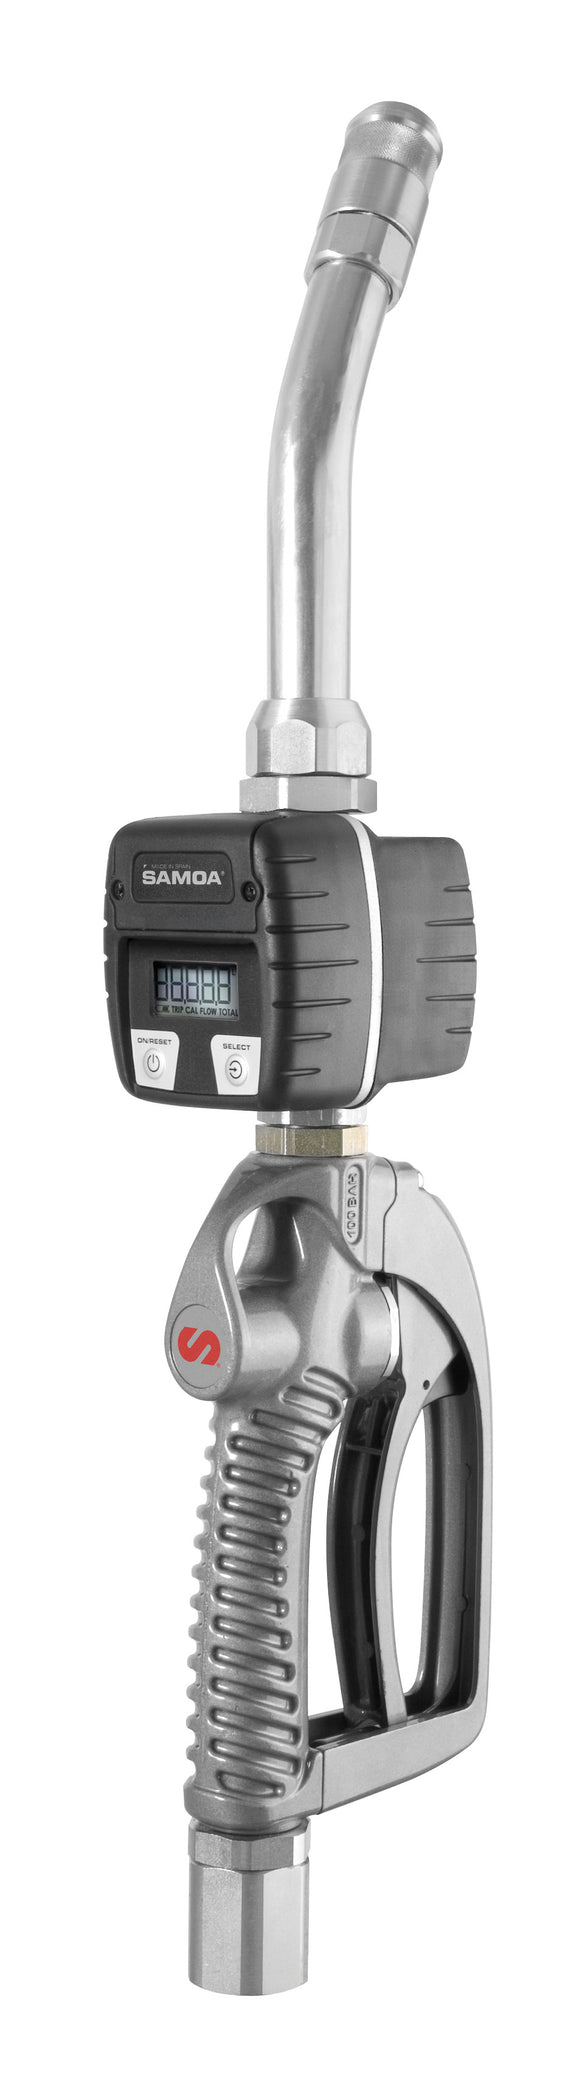 SAMOA Metered High Flow Oil Control Valve with 30° Rigid with Semi-Auto Non-Drip Tip - 3/4